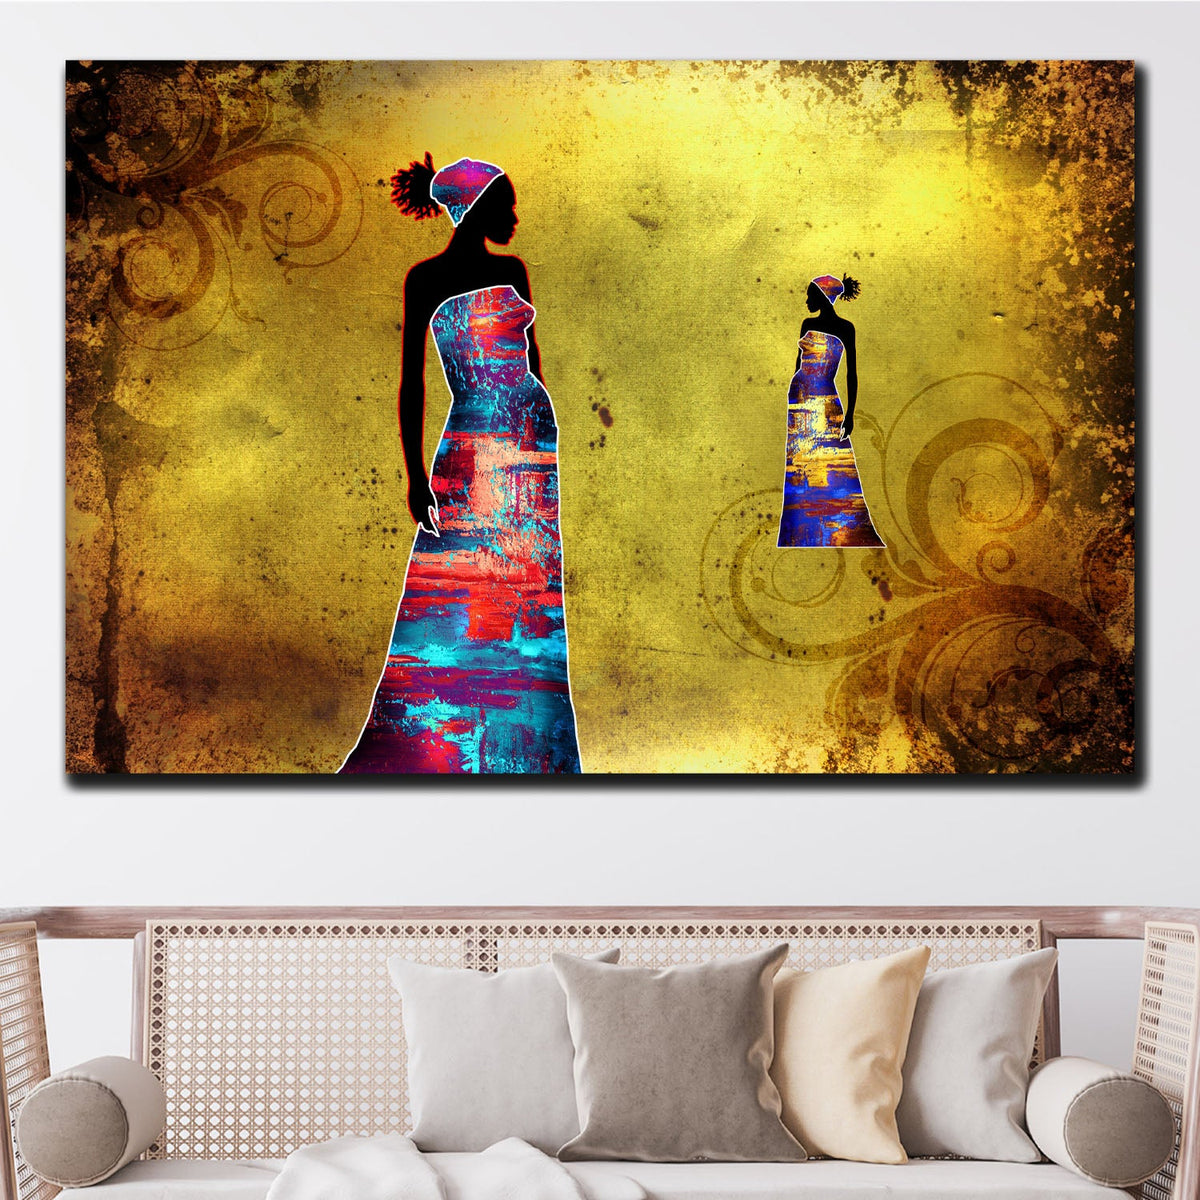 https://cdn.shopify.com/s/files/1/0387/9986/8044/products/AfricanEthnicWomanCanvasArtprintStretched-2.jpg